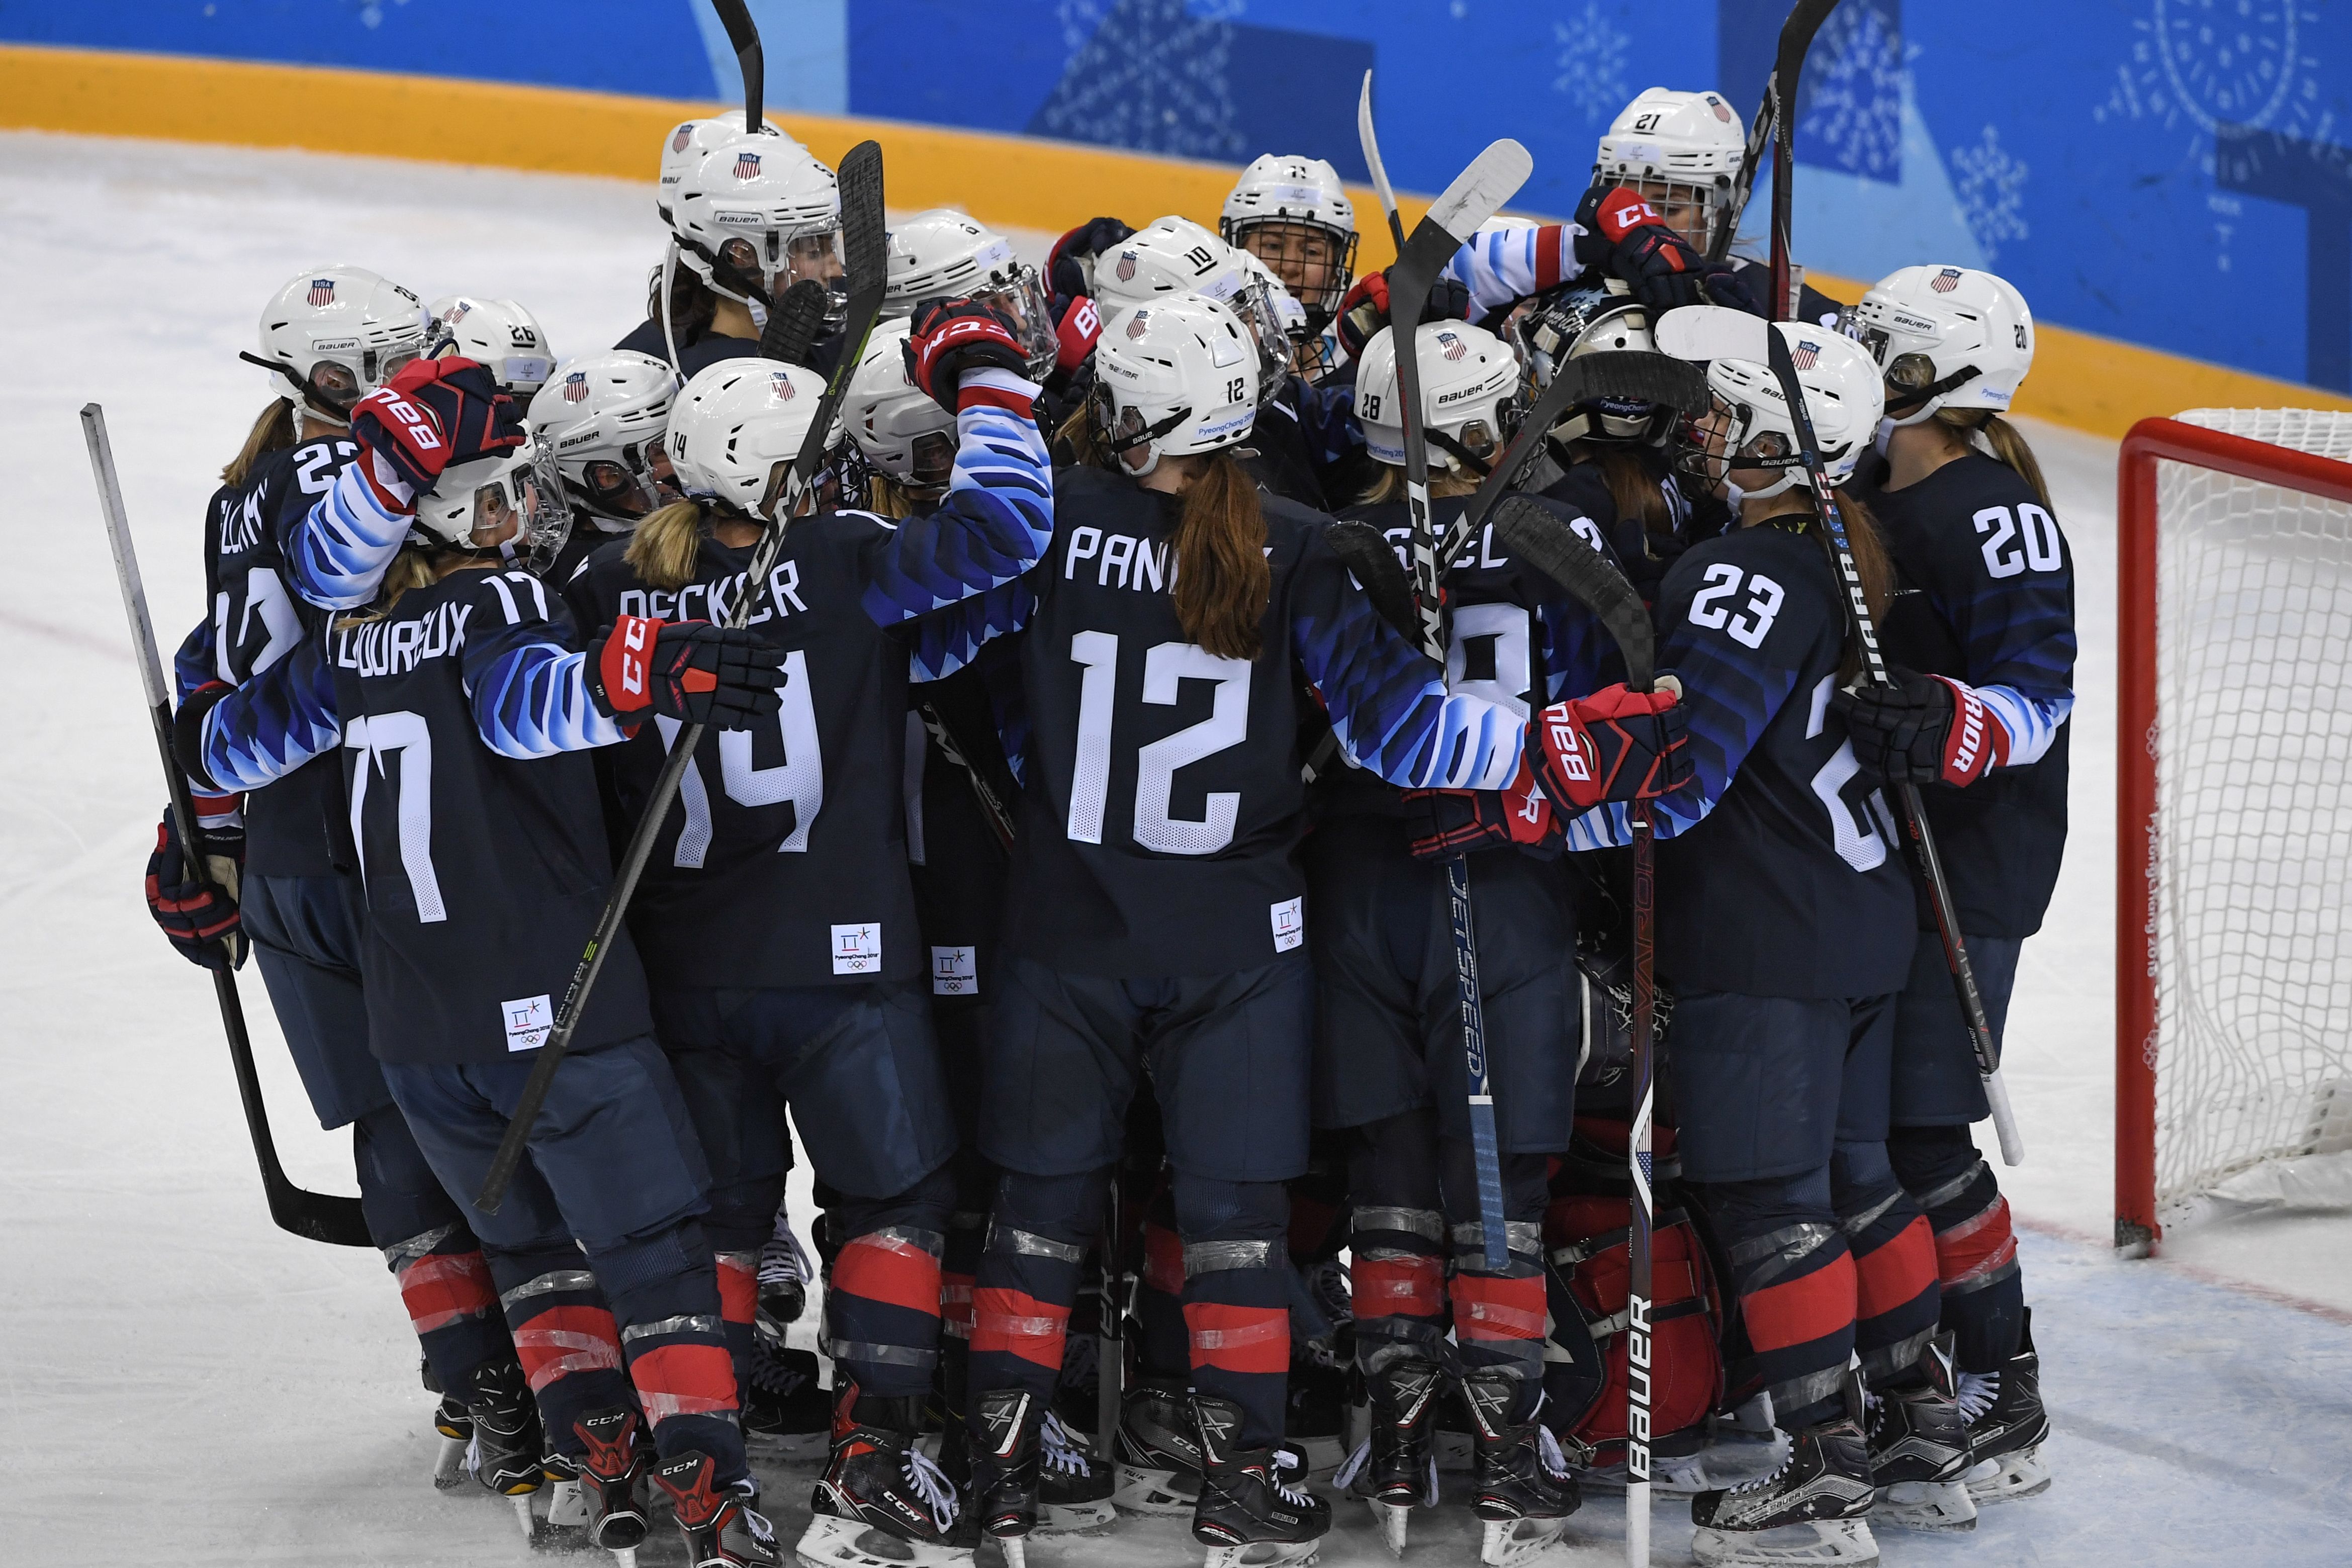 U.S. players celebrate after the women's ice hockey semifinal game between the United States and Finland during the Pyeongchang 2018 Winter Olympic Games at the Gangneung Hockey Centre in Gangneung on Feb. 19, 2018. (Jung Yeon-Je—AFP/Getty Images)